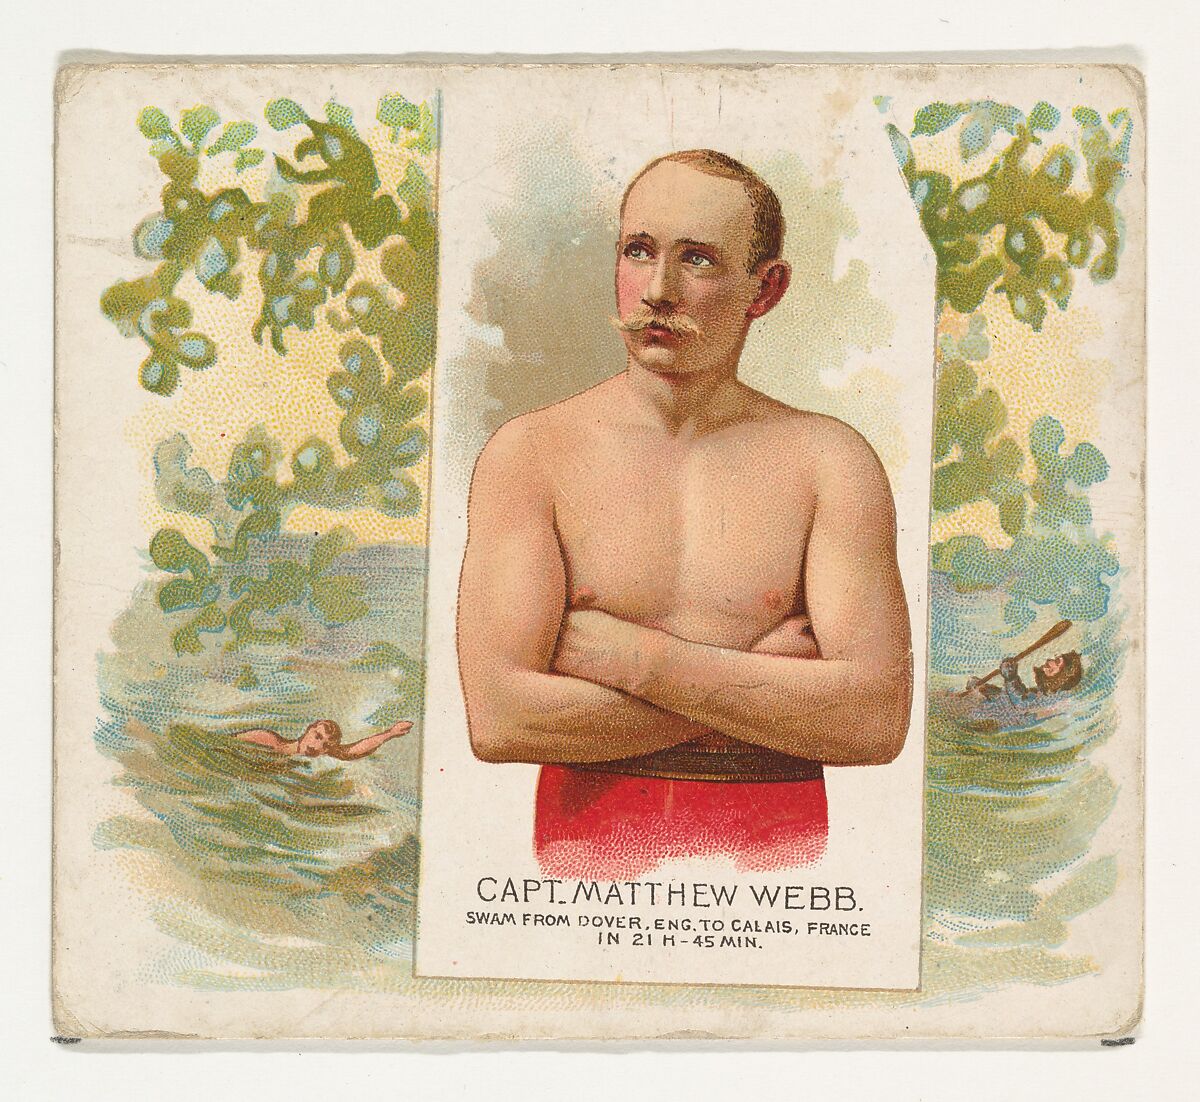 Captain Matthew Webb, Swam From Dover, England to Calais, France, from World's Champions, Second Series (N43) for Allen & Ginter Cigarettes, Allen &amp; Ginter (American, Richmond, Virginia), Commercial lithograph 